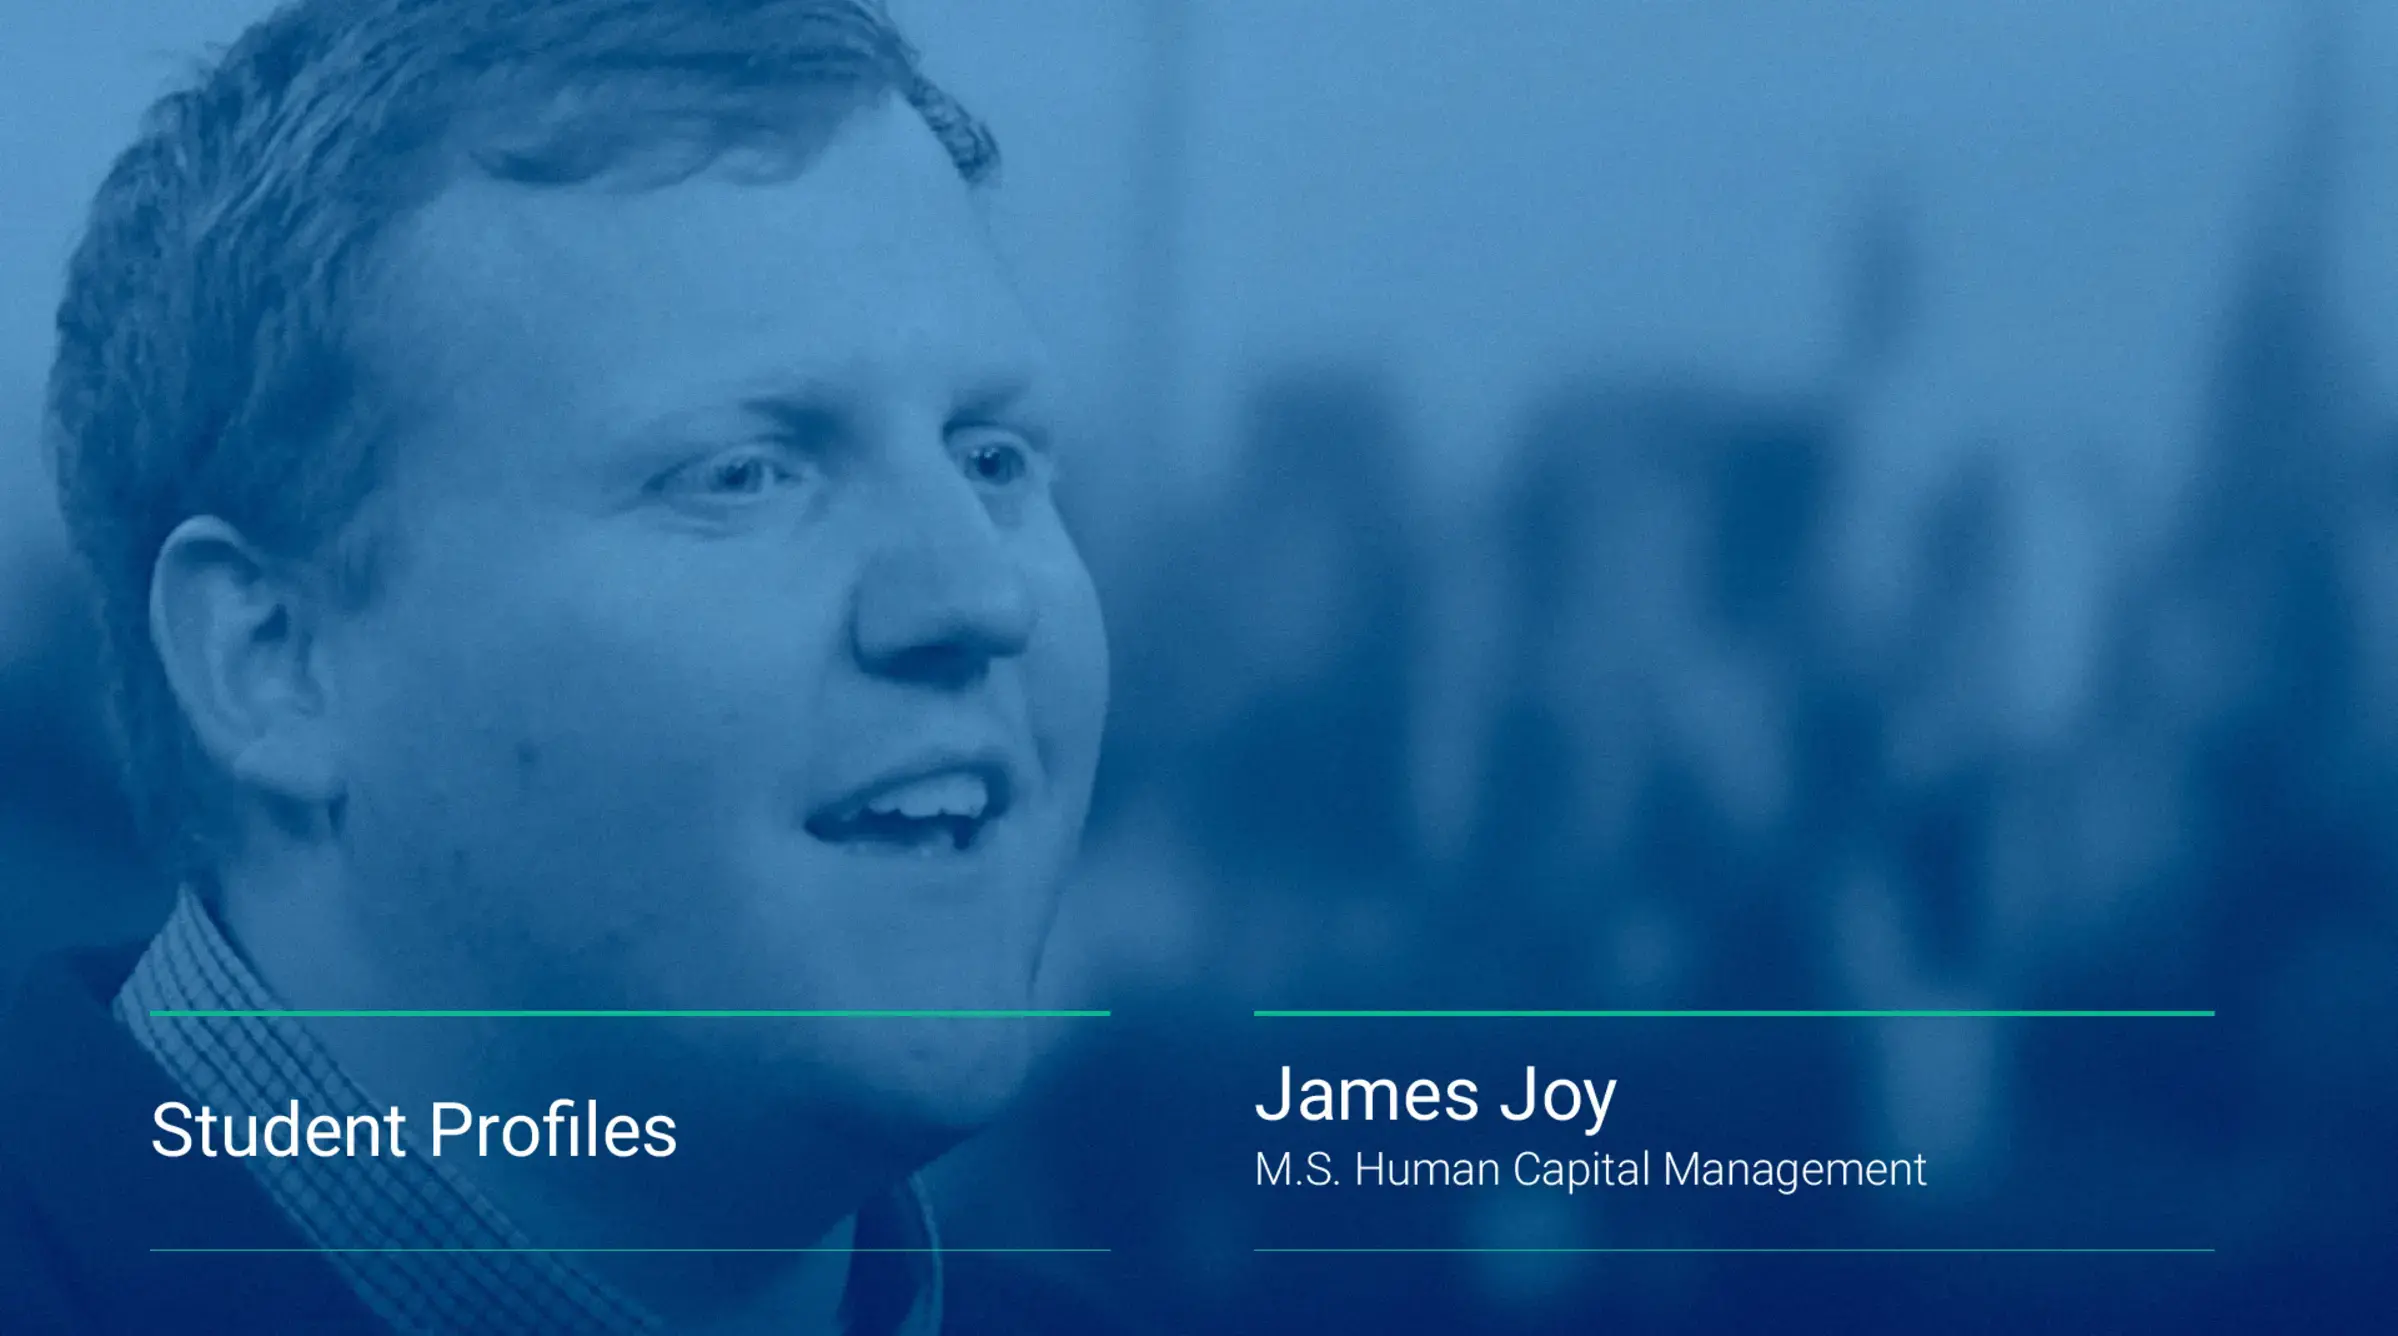 A still from James Joy's video interview about the Human Capital Management master's program.